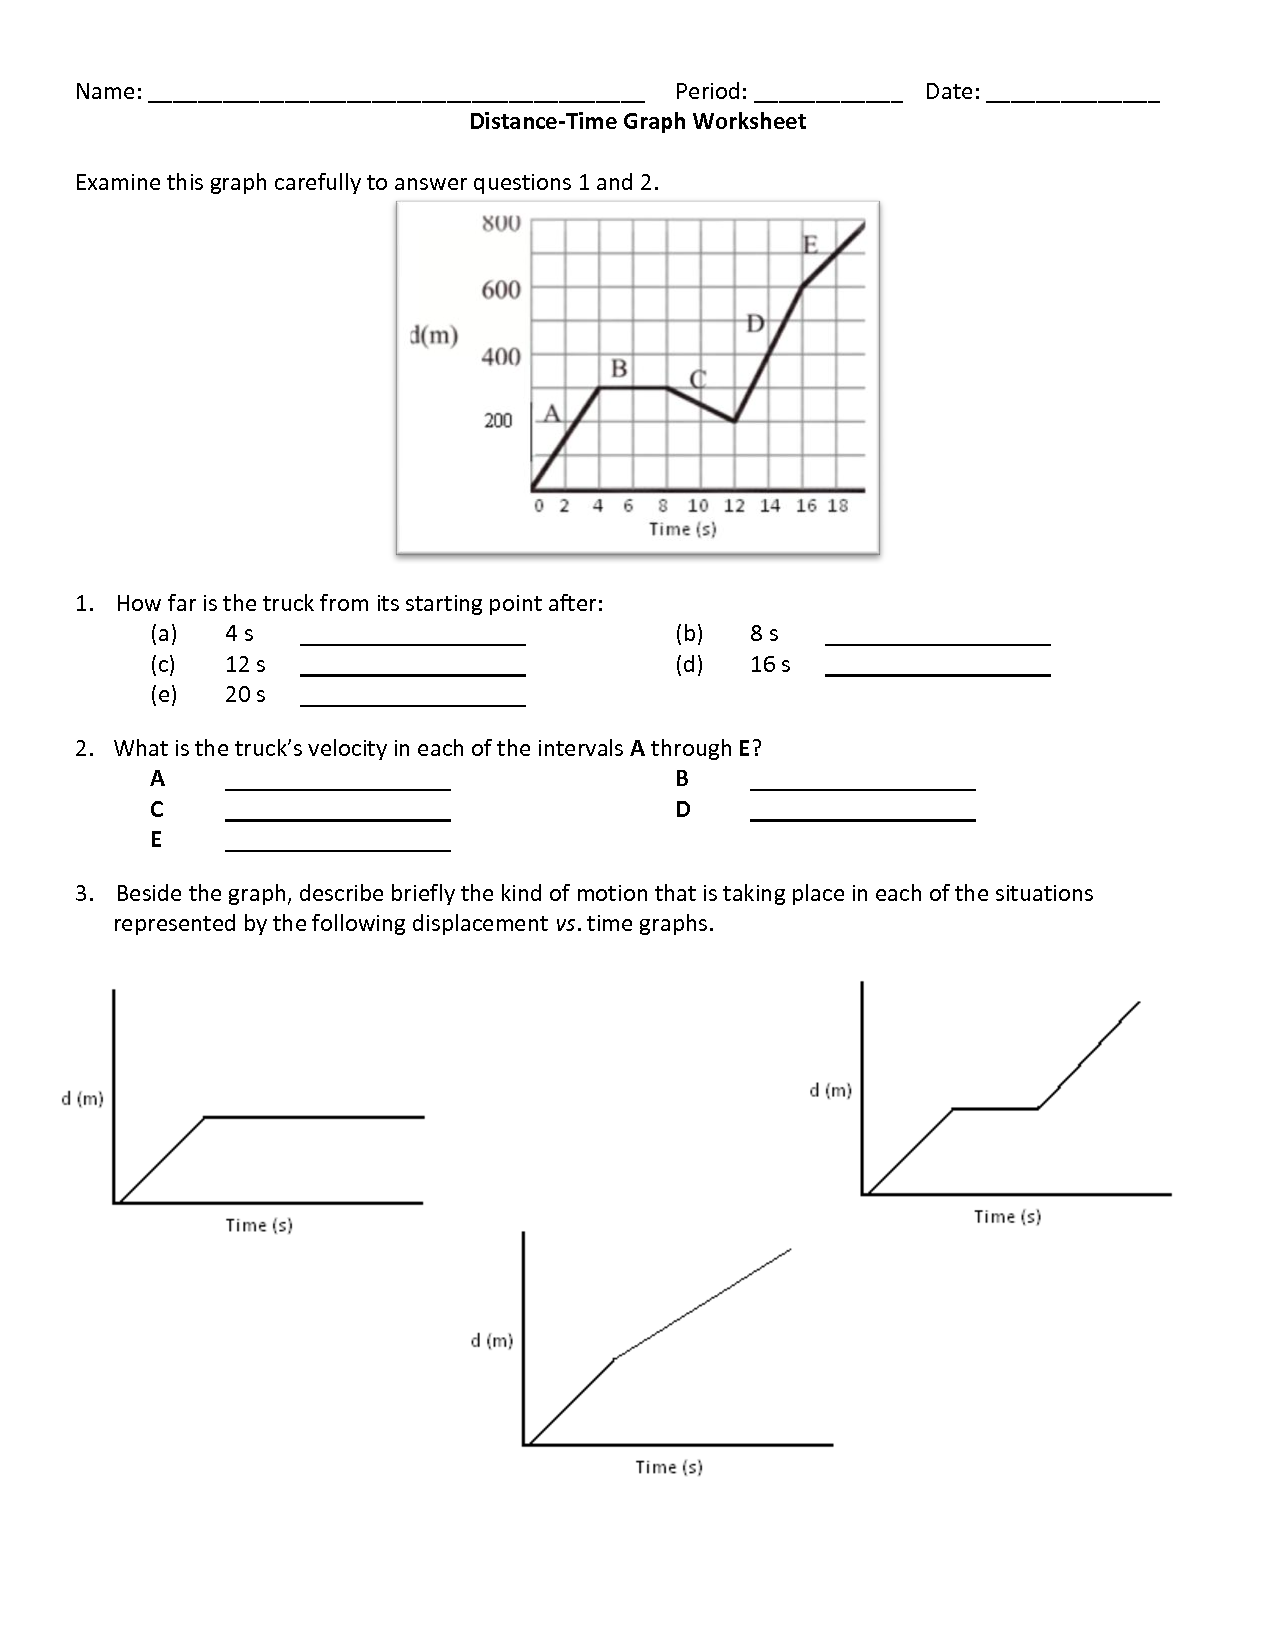 8 Best Images of Speed Distance Time Worksheet - Time and ...